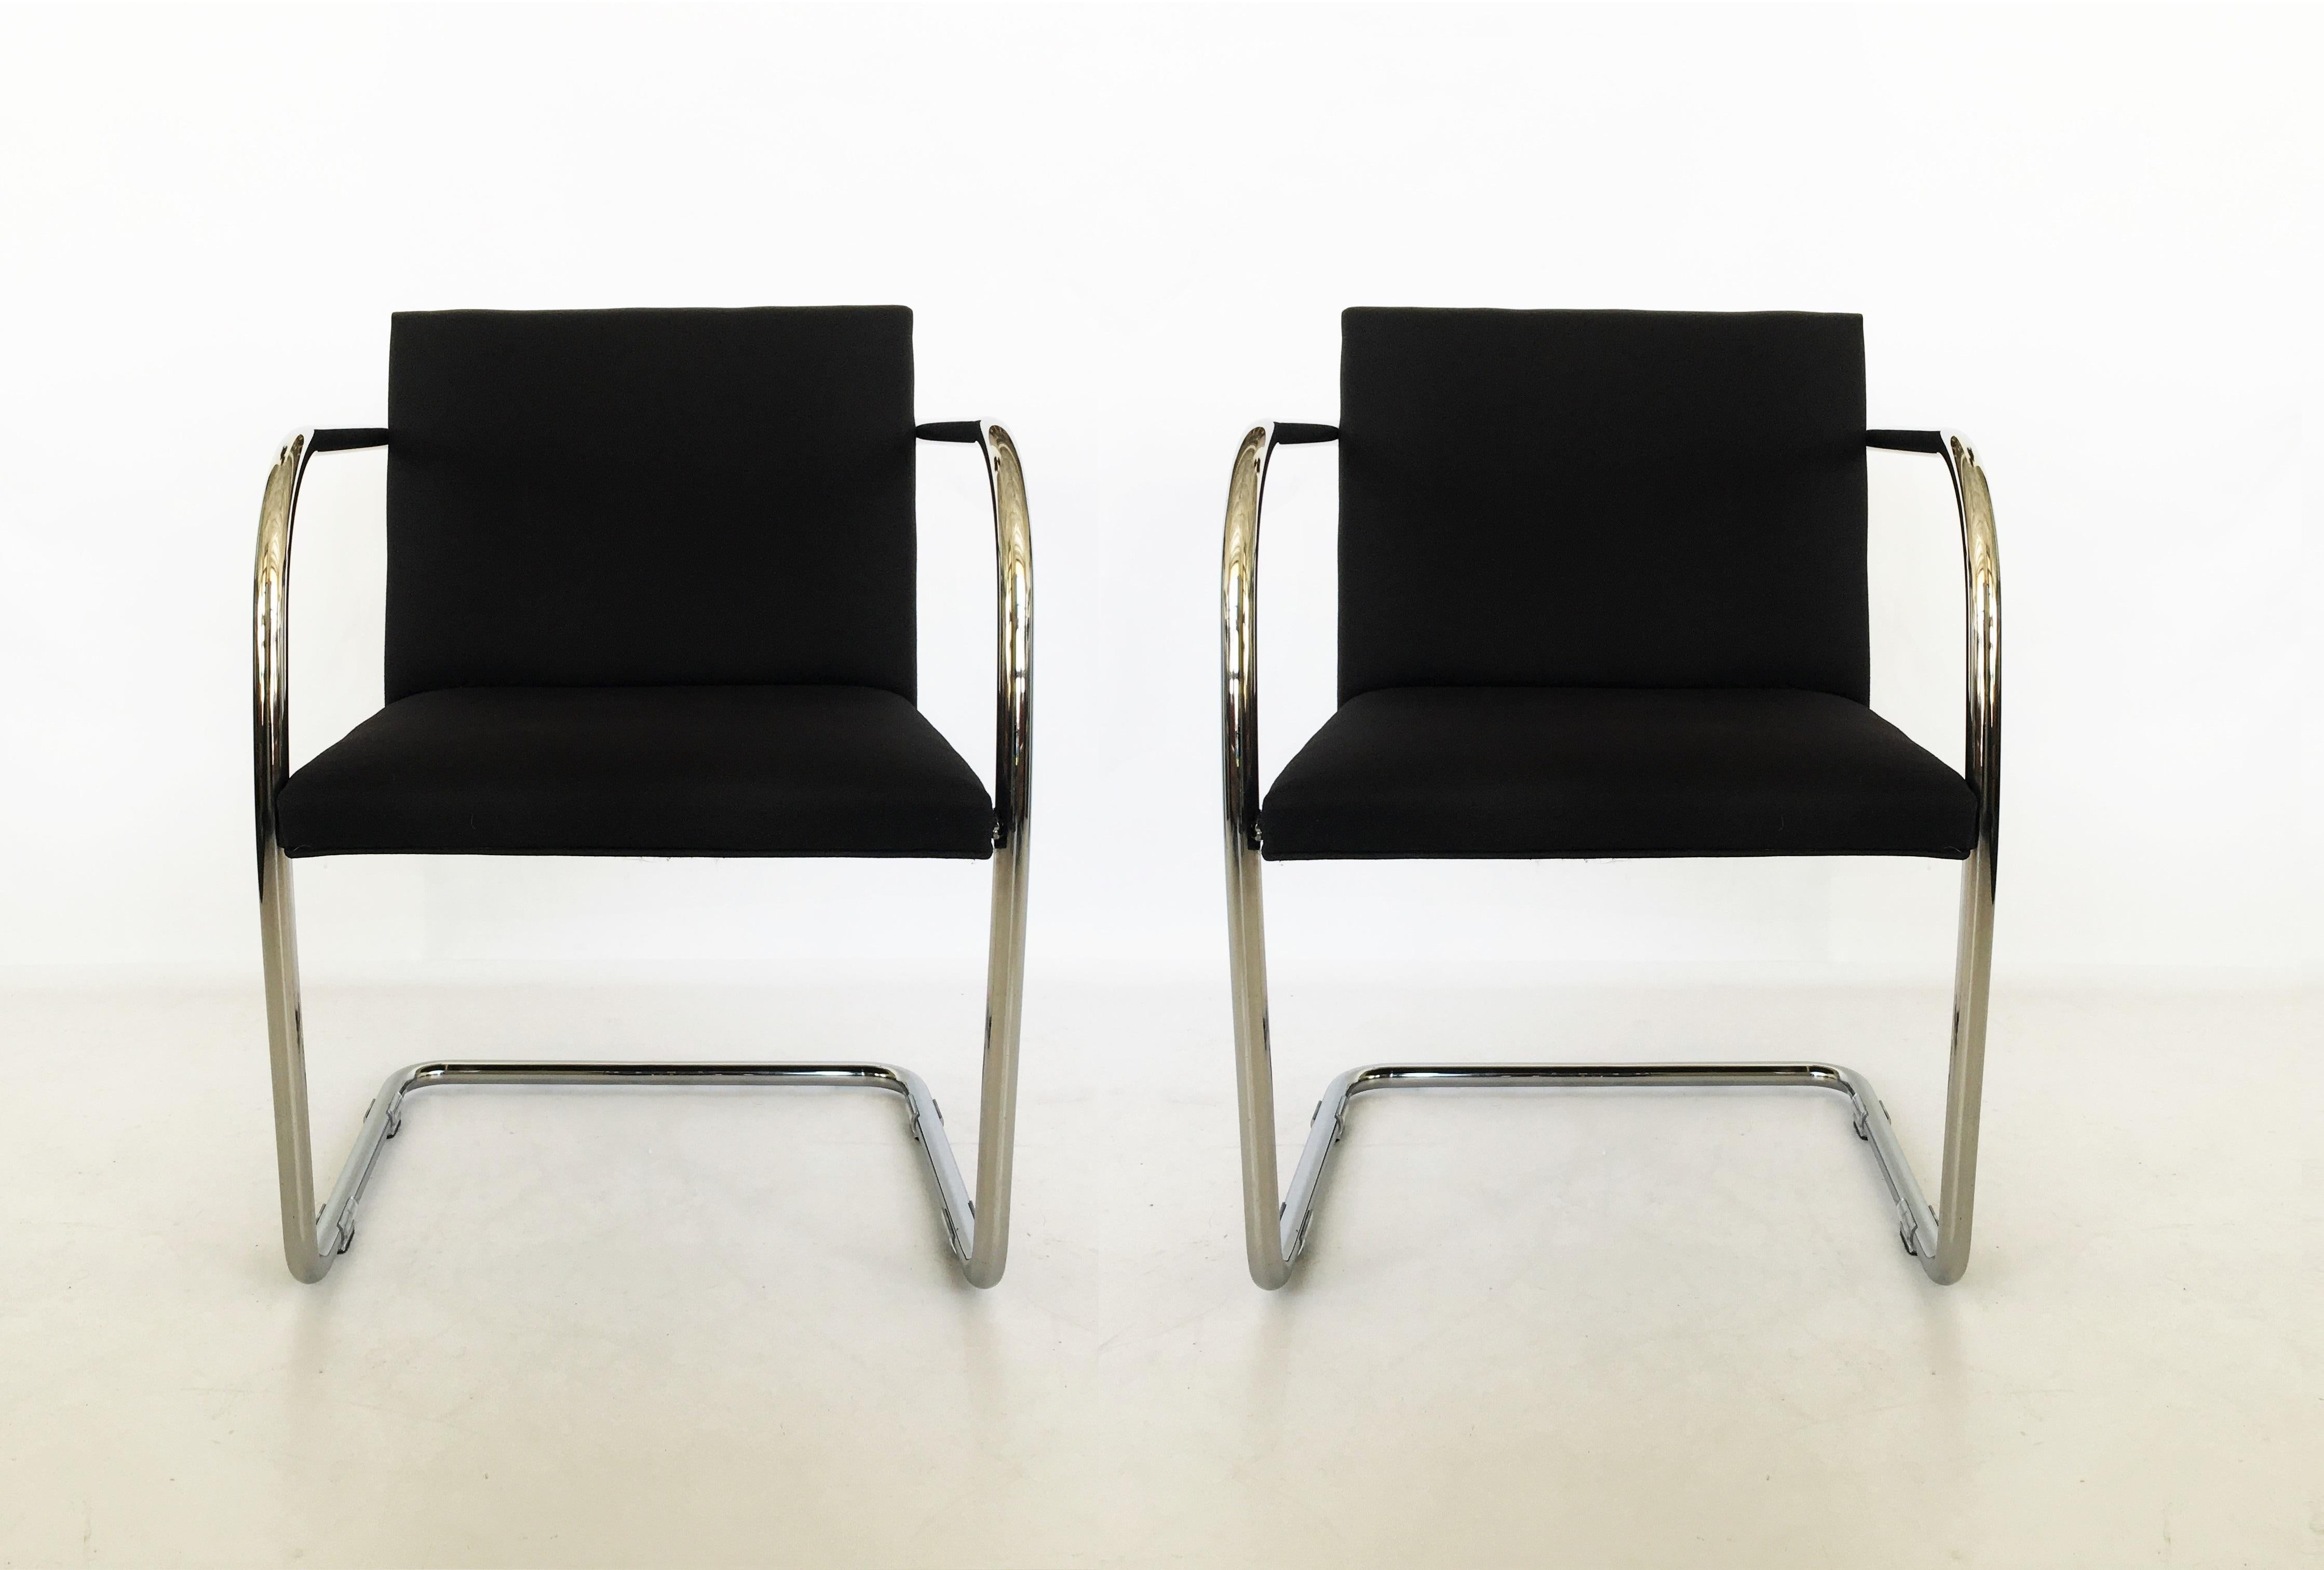 Classic Bauhaus design pair of Brno chairs by Mies van der Rohe for Thonet. The chairs feature polished chrome-plated tubular steel cantilevered frames, seats upholstered in a black fabric. One chair retains original label.